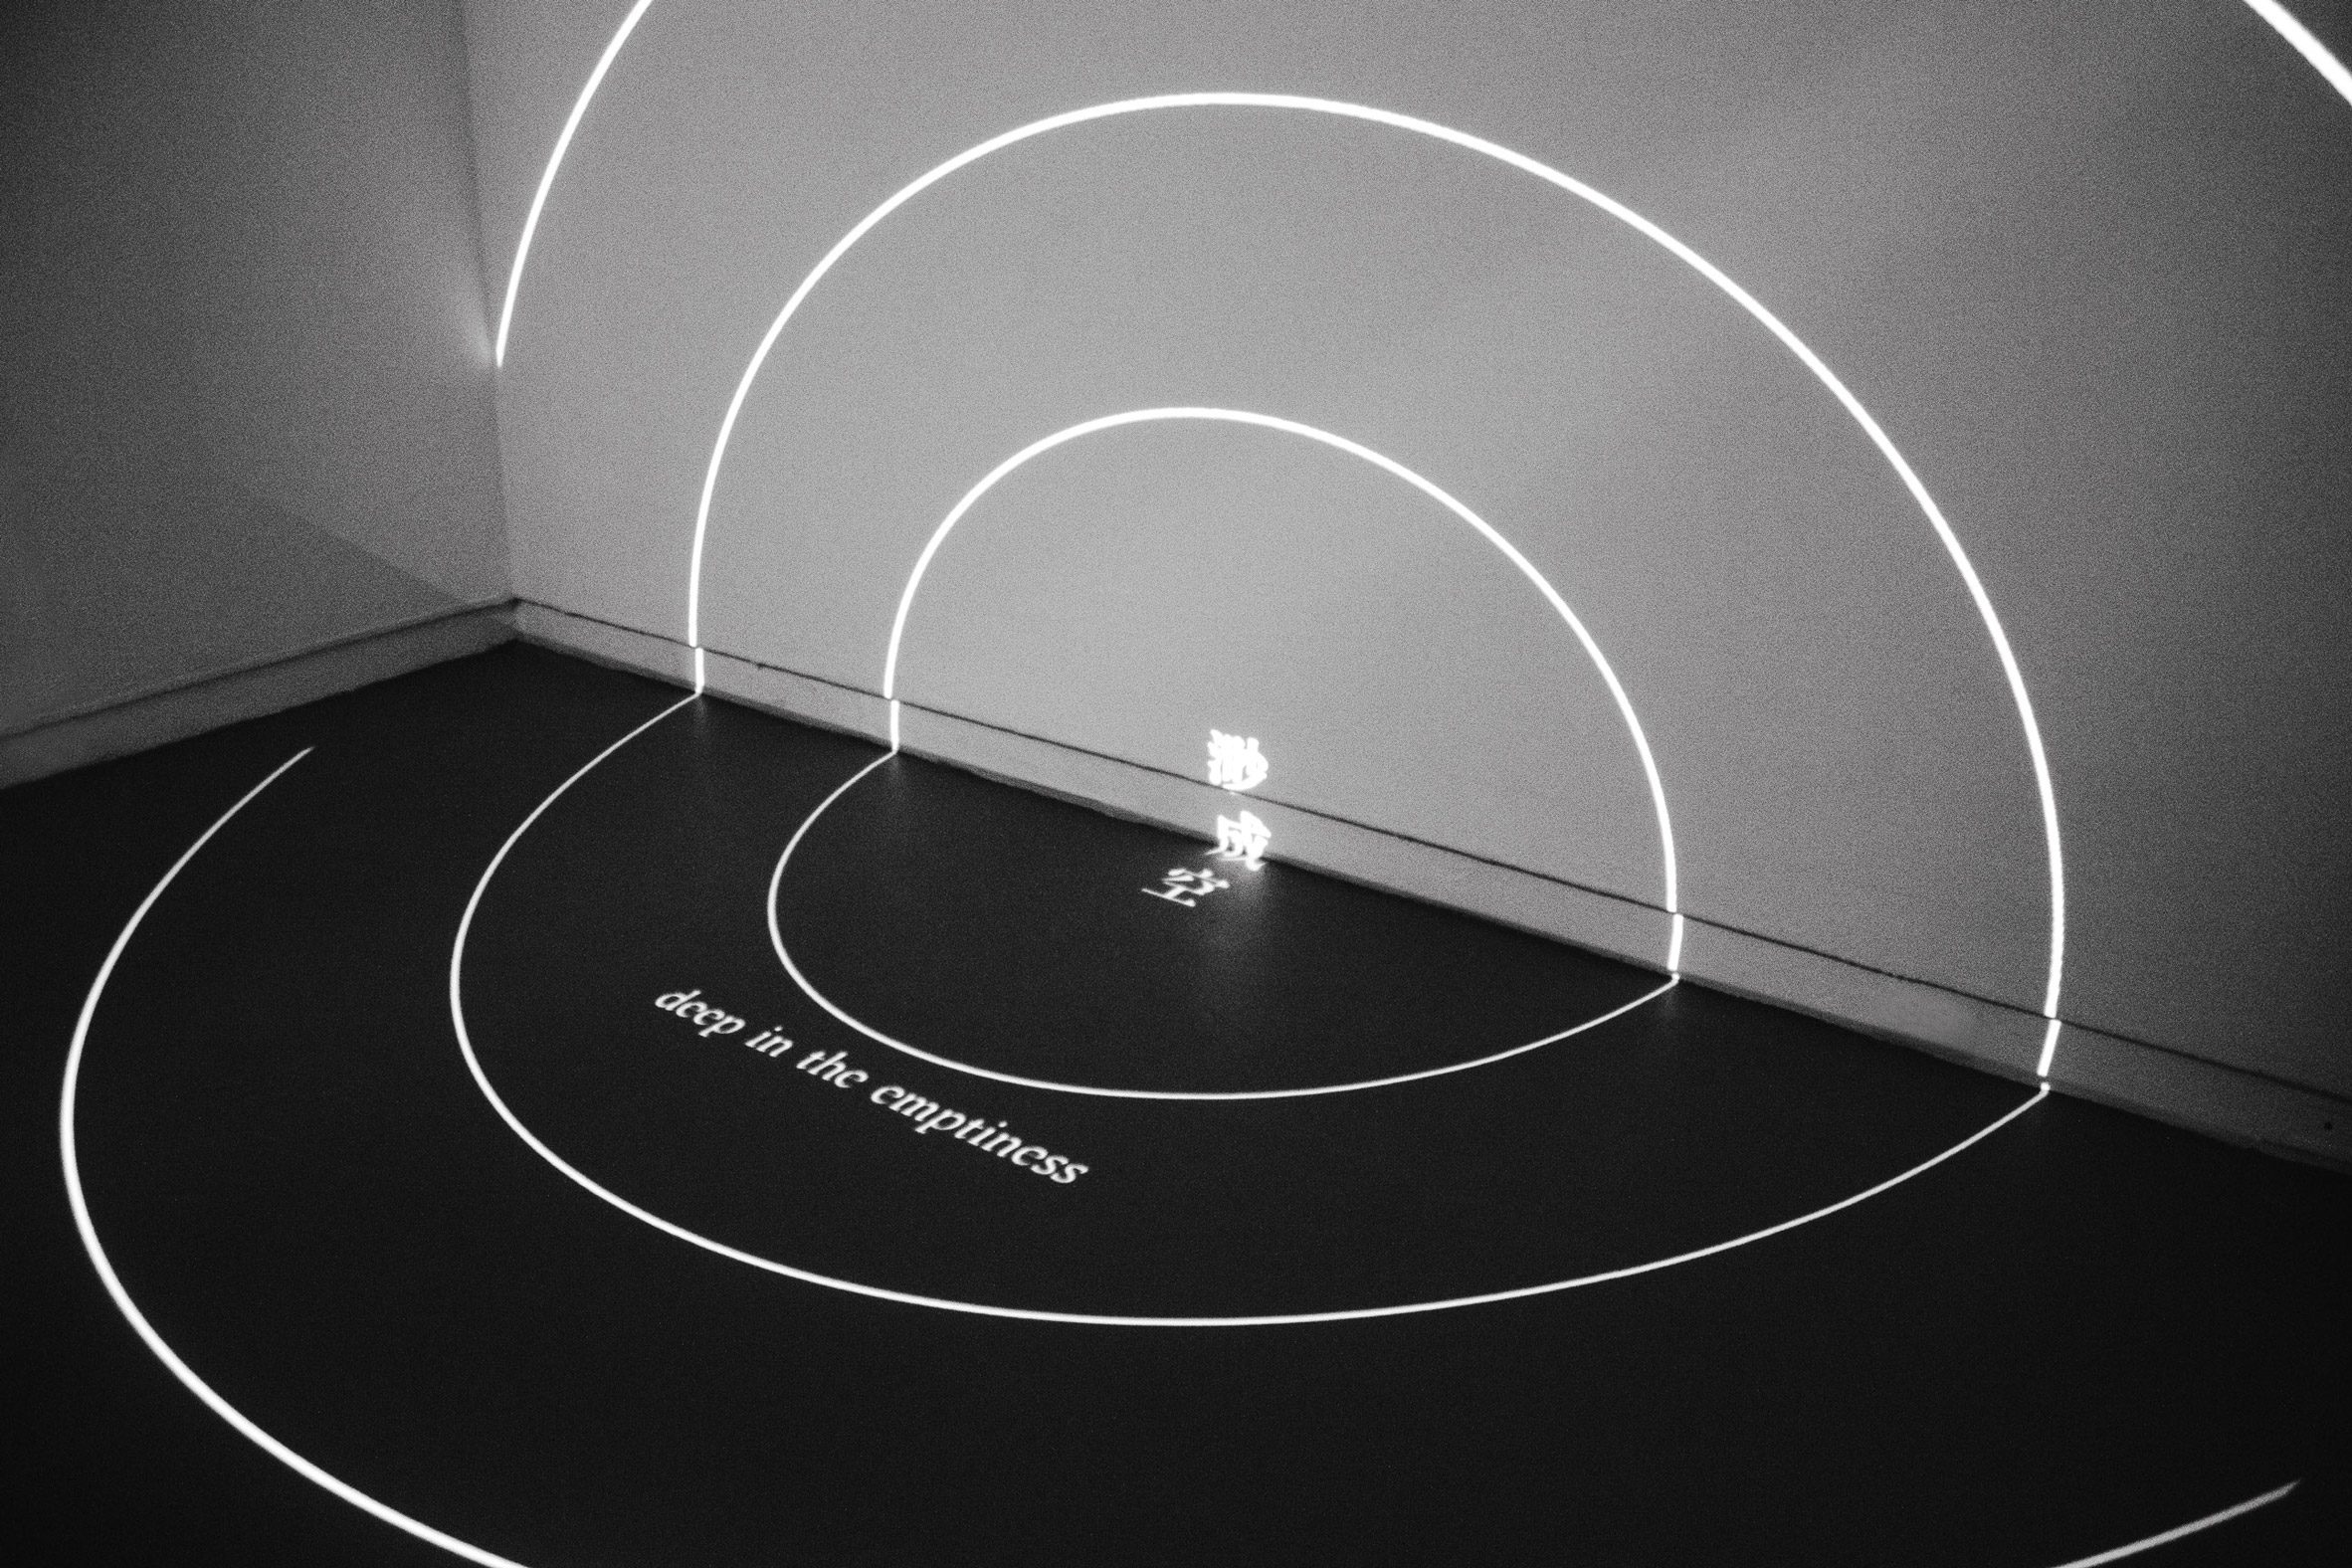 Gallery with light exhibition of projected Chinese character in the middle of consecutive rings